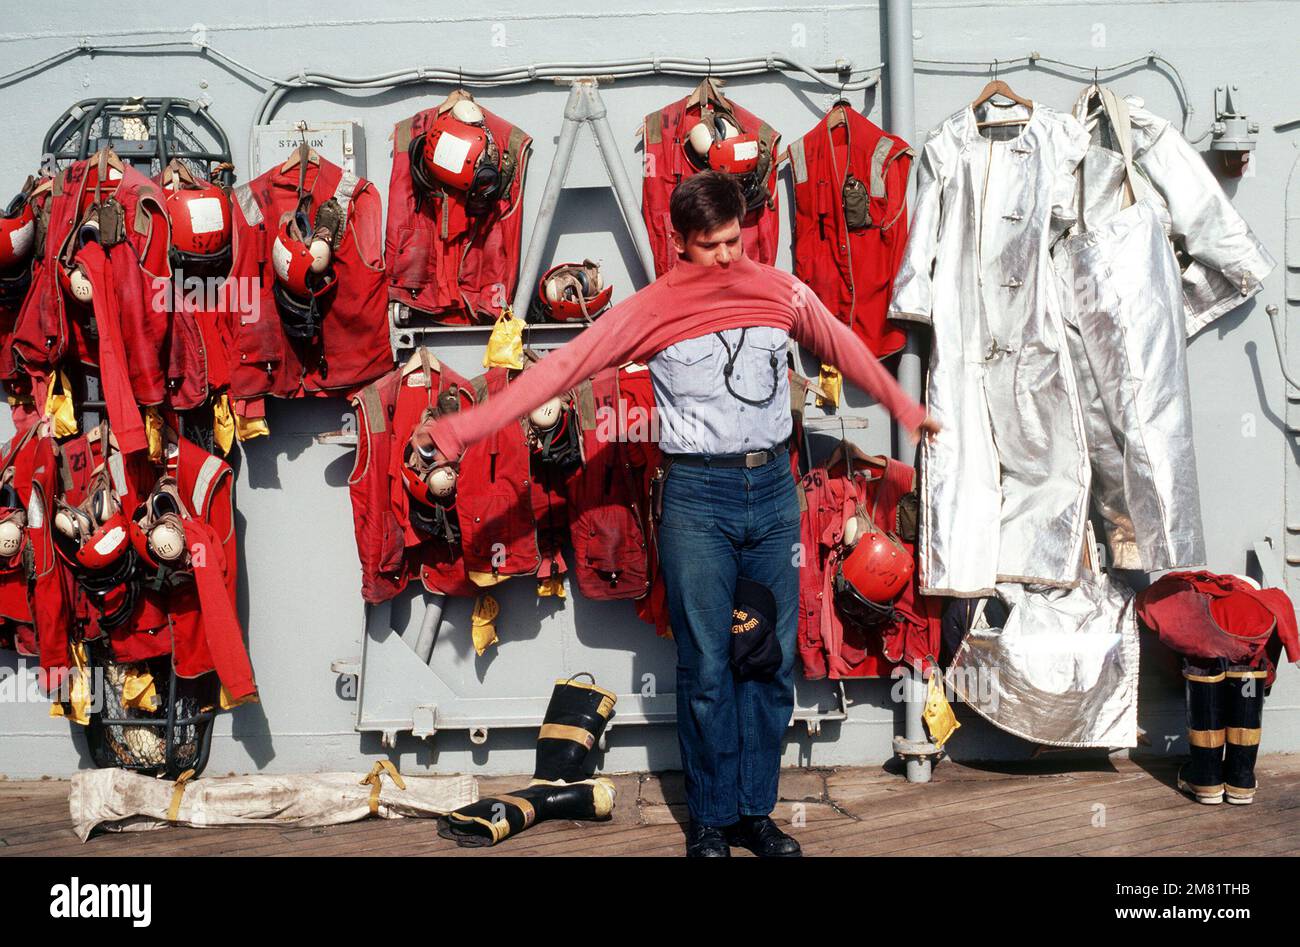 A crash crewman puts on a red jersey prior to flight operations aboard the battleship USS NEW JERSEY (BB 62). The ship is participating in operations off the coast of Lebanon. Base: USS New Jersey (BB 62) Stock Photo